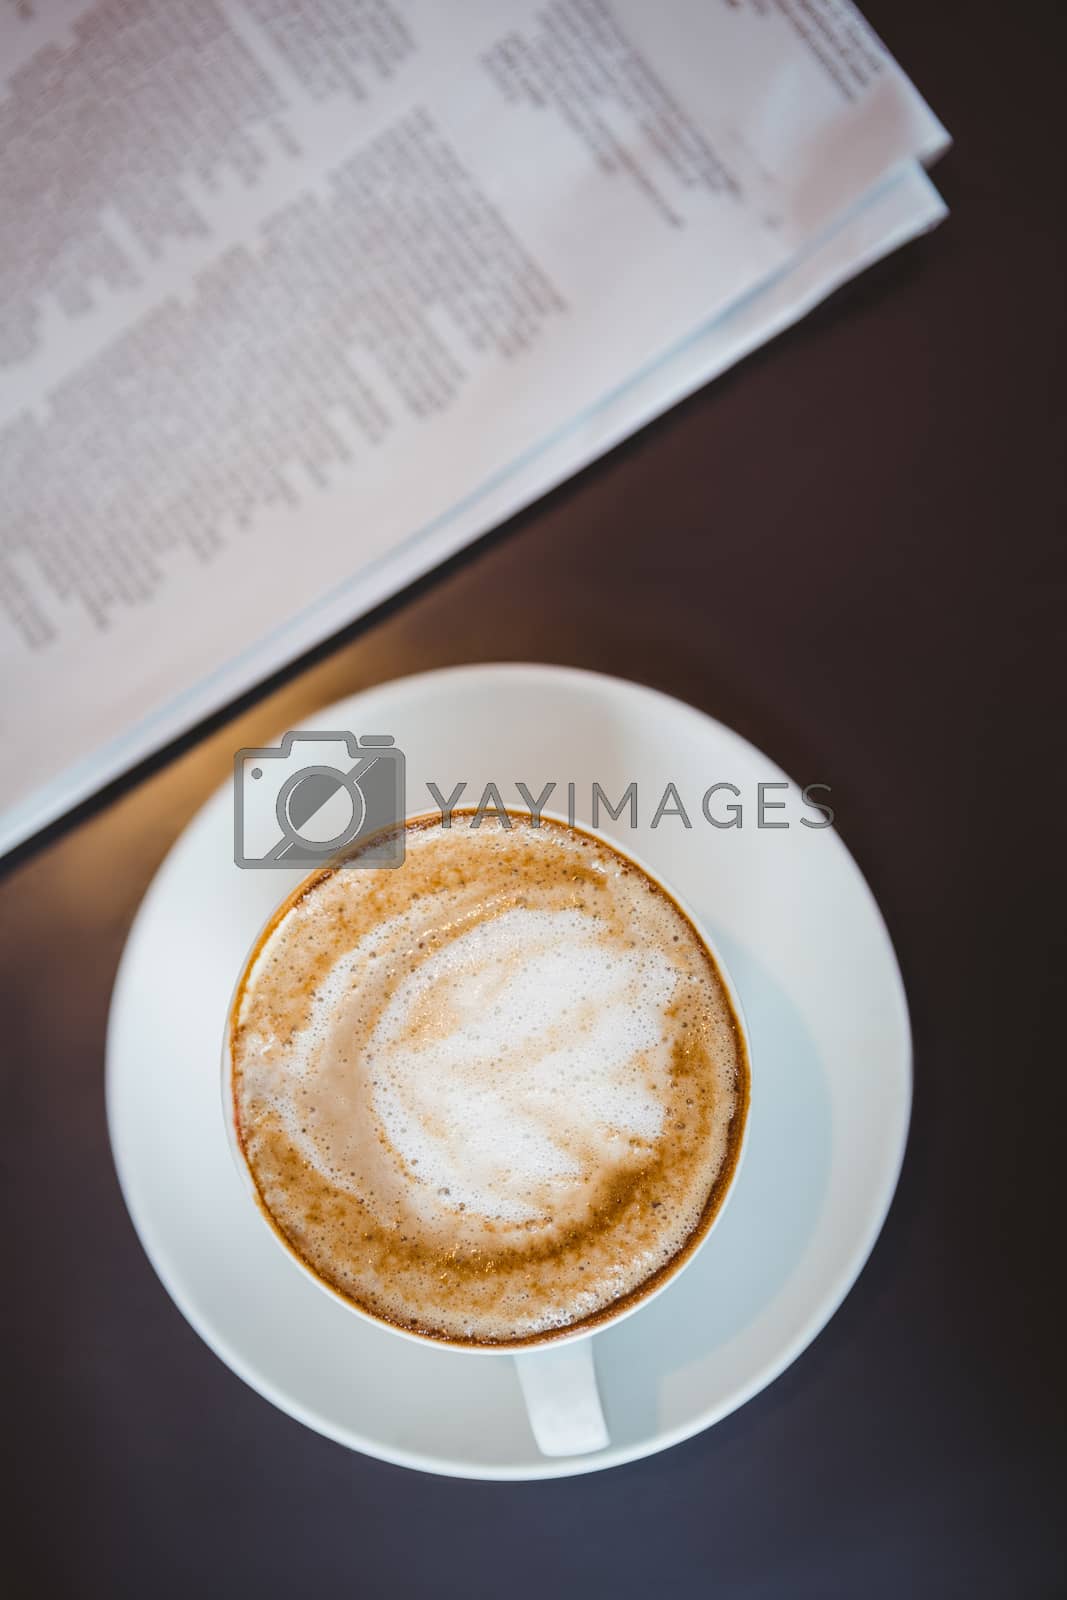 Royalty free image of Close up view of a cappuccino by Wavebreakmedia